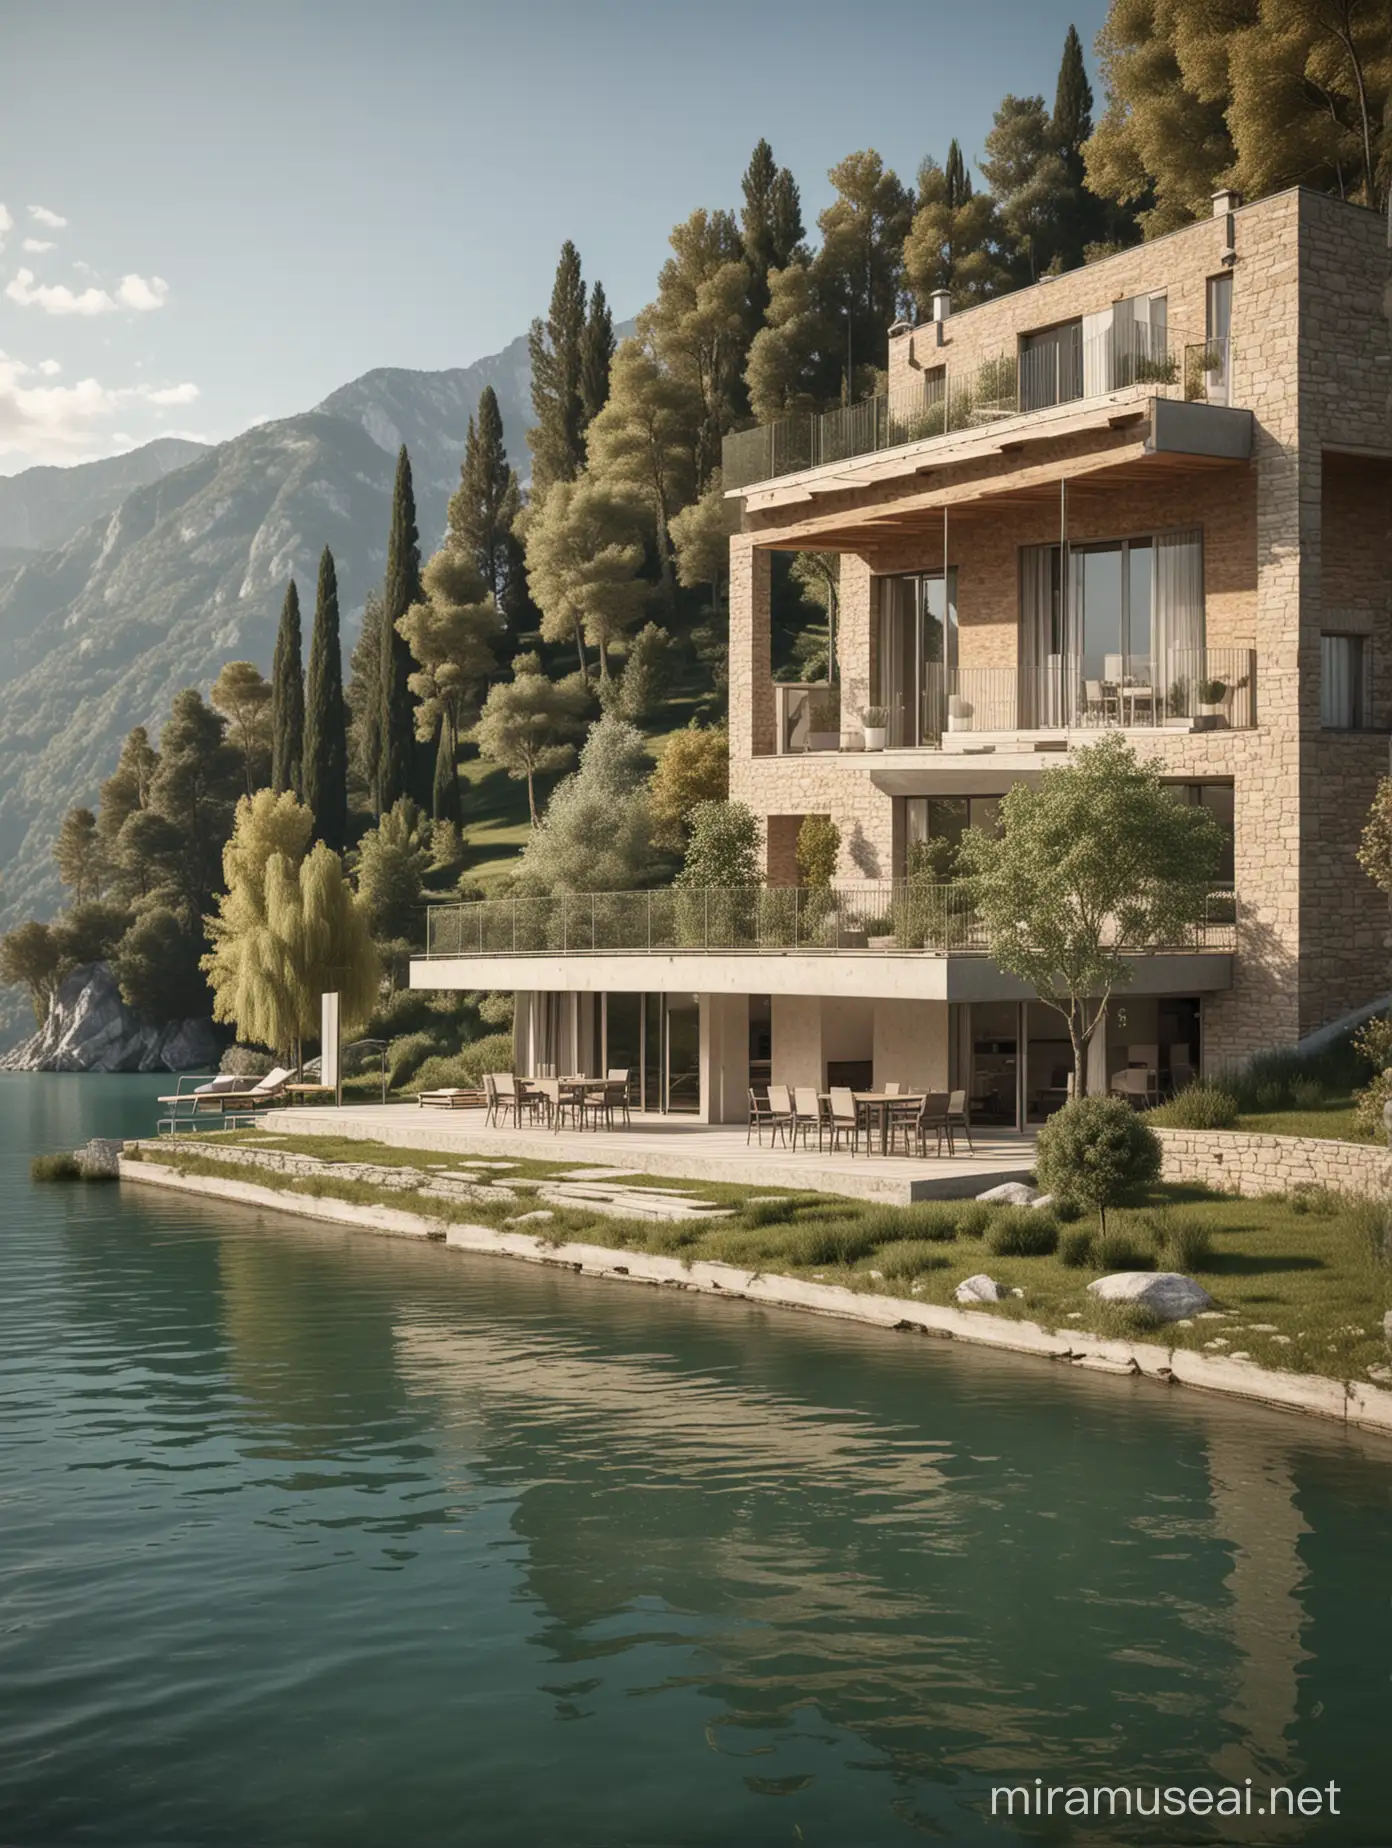 Modern Lombardy Lakeside House with Terrace and Blurred Figures